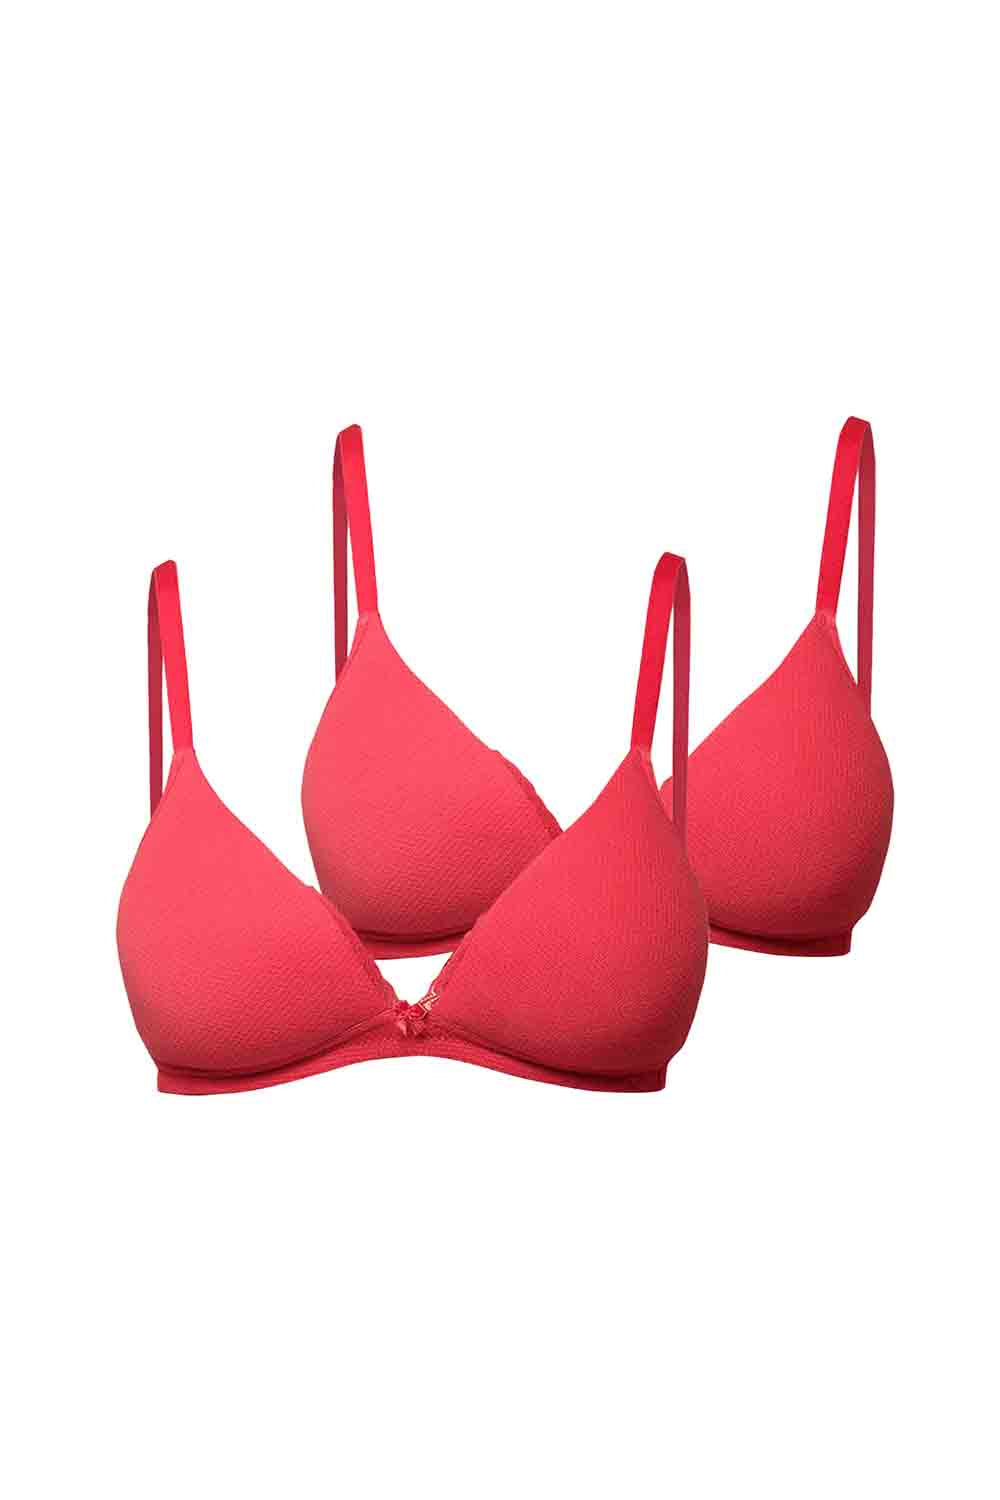 Body by Victoria lightly lined pink bra 44C